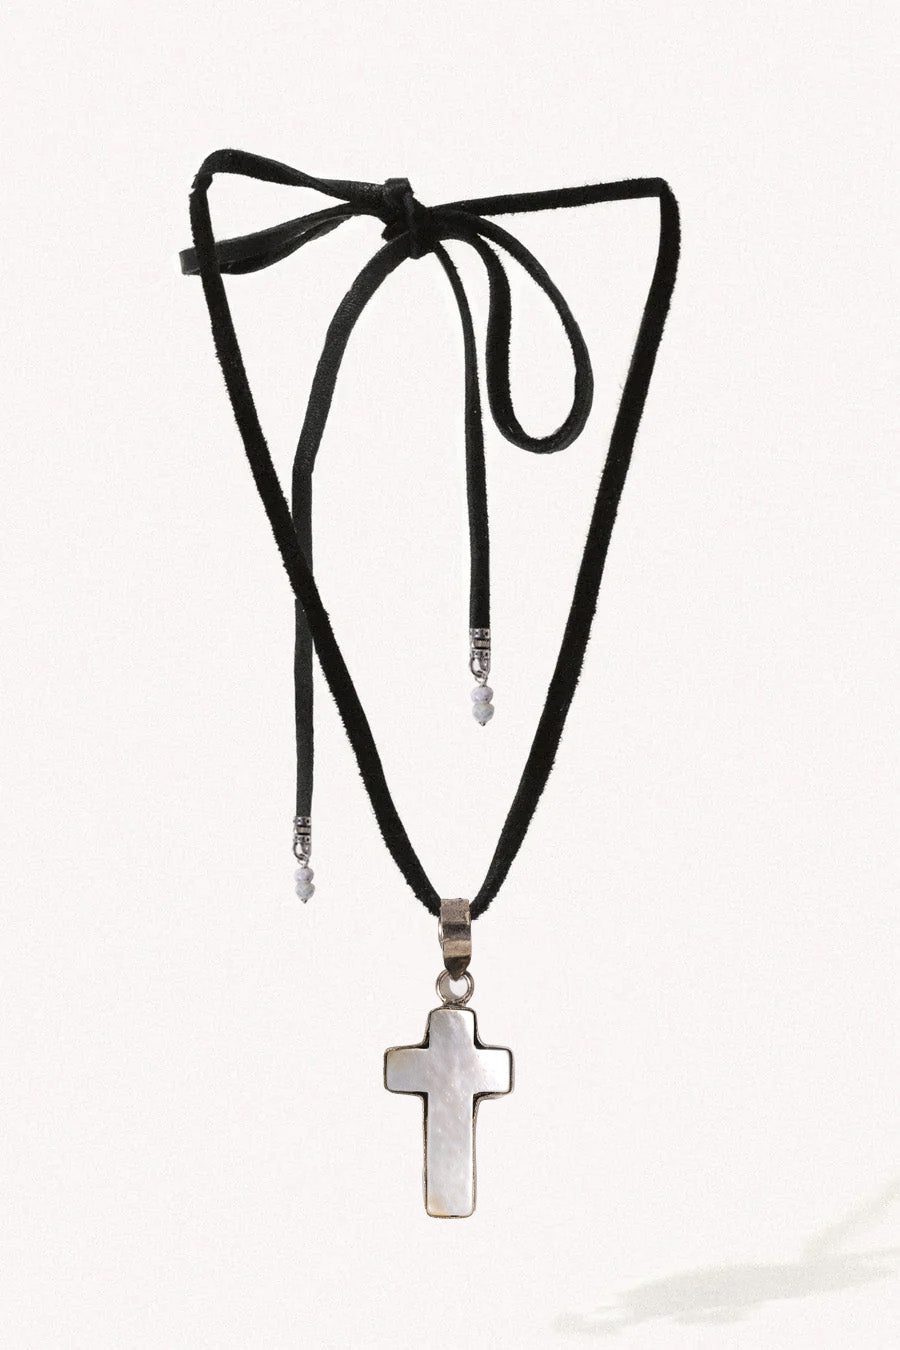 Om Imports Jewelry Black Selvia Mother of Pearl Cross Necklace